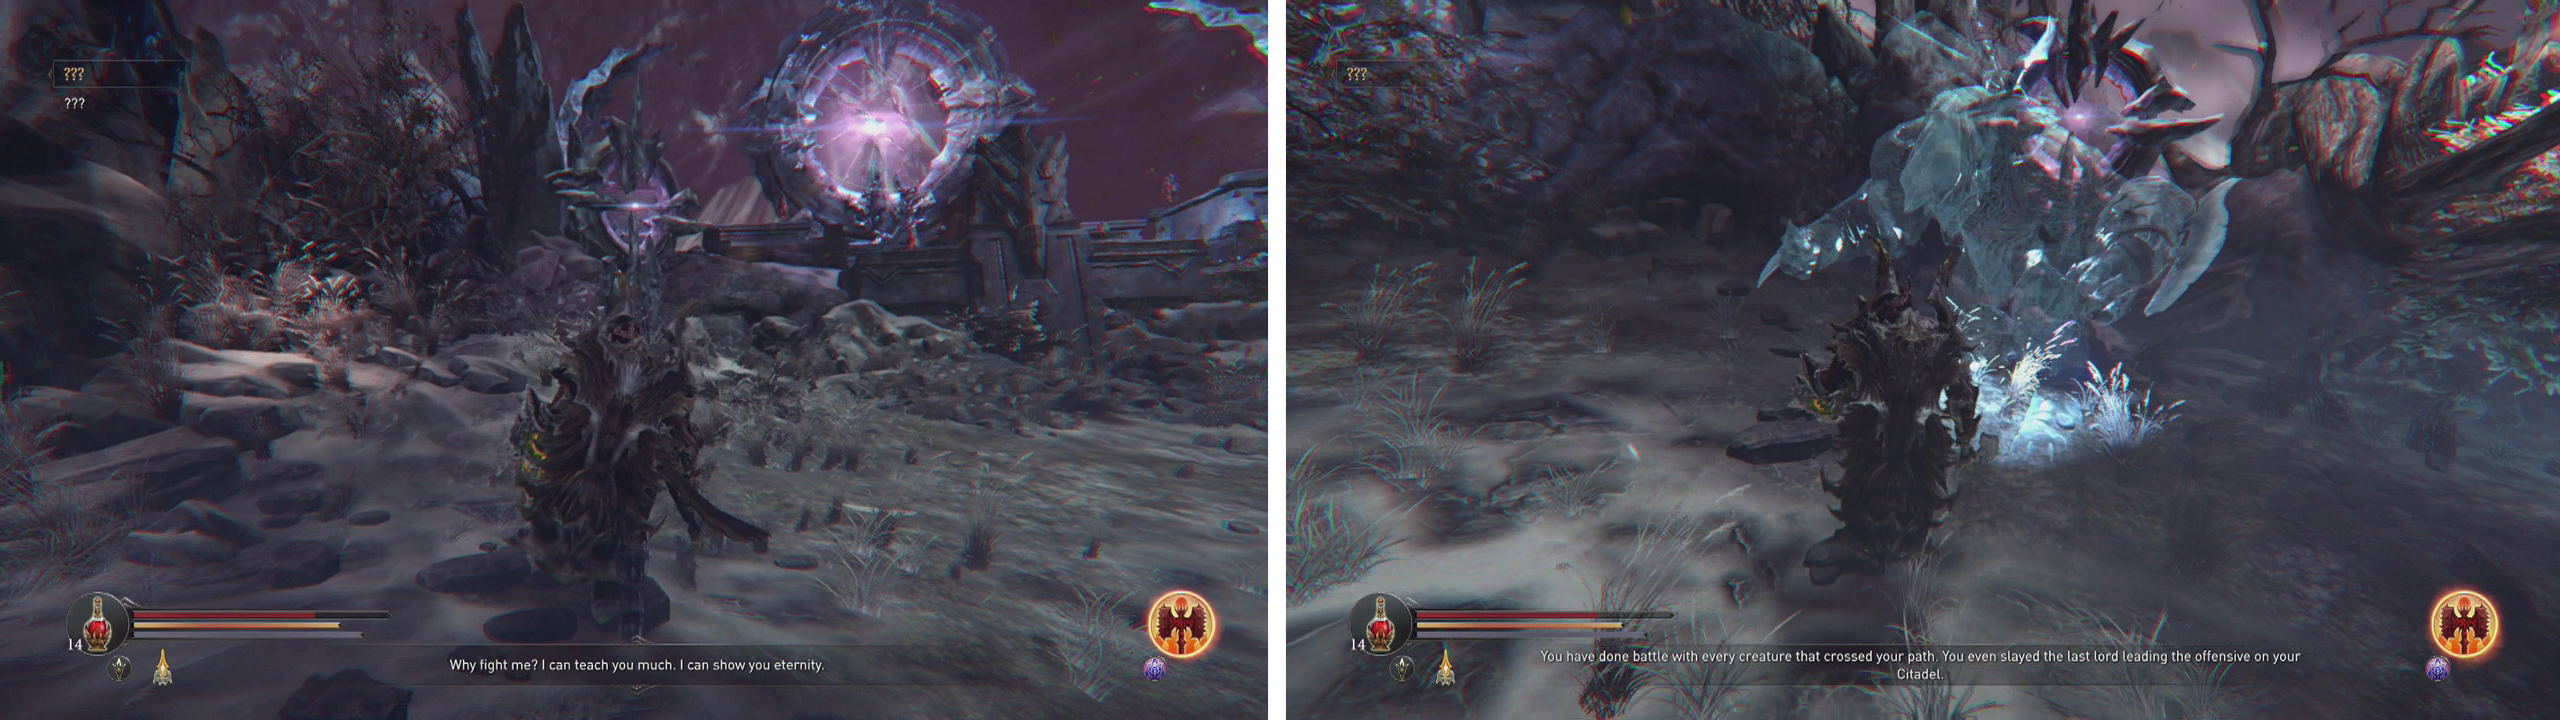 Enter the open area (left) and kill the ghostly versions of the bosses as they appear (right).